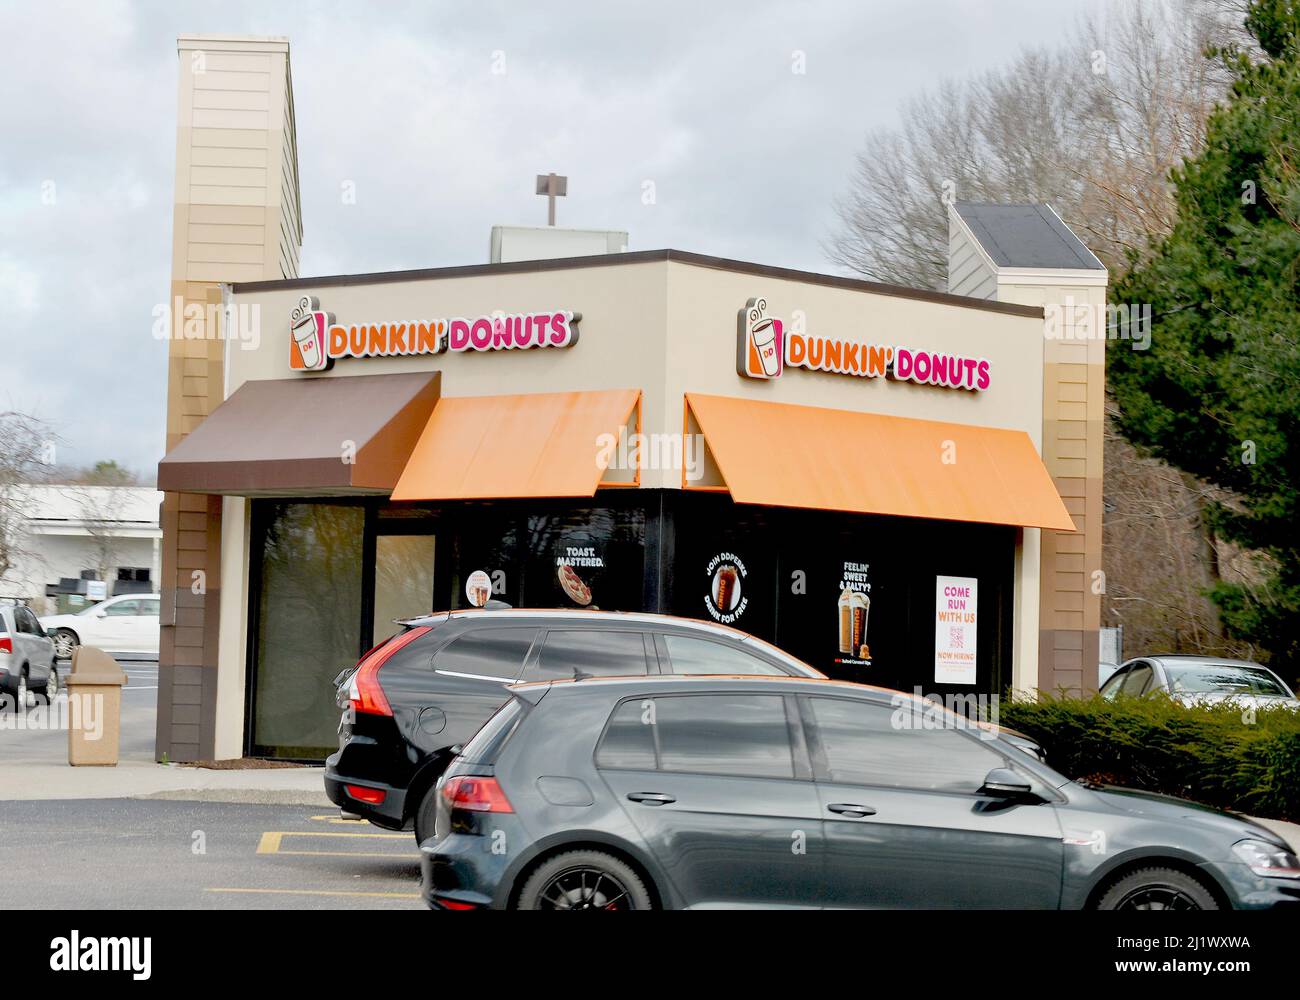 Dunkin Donuts-Dunkin is one of the largest coffee and baked goods chains in the world. Norwich, CT, United States Stock Photo